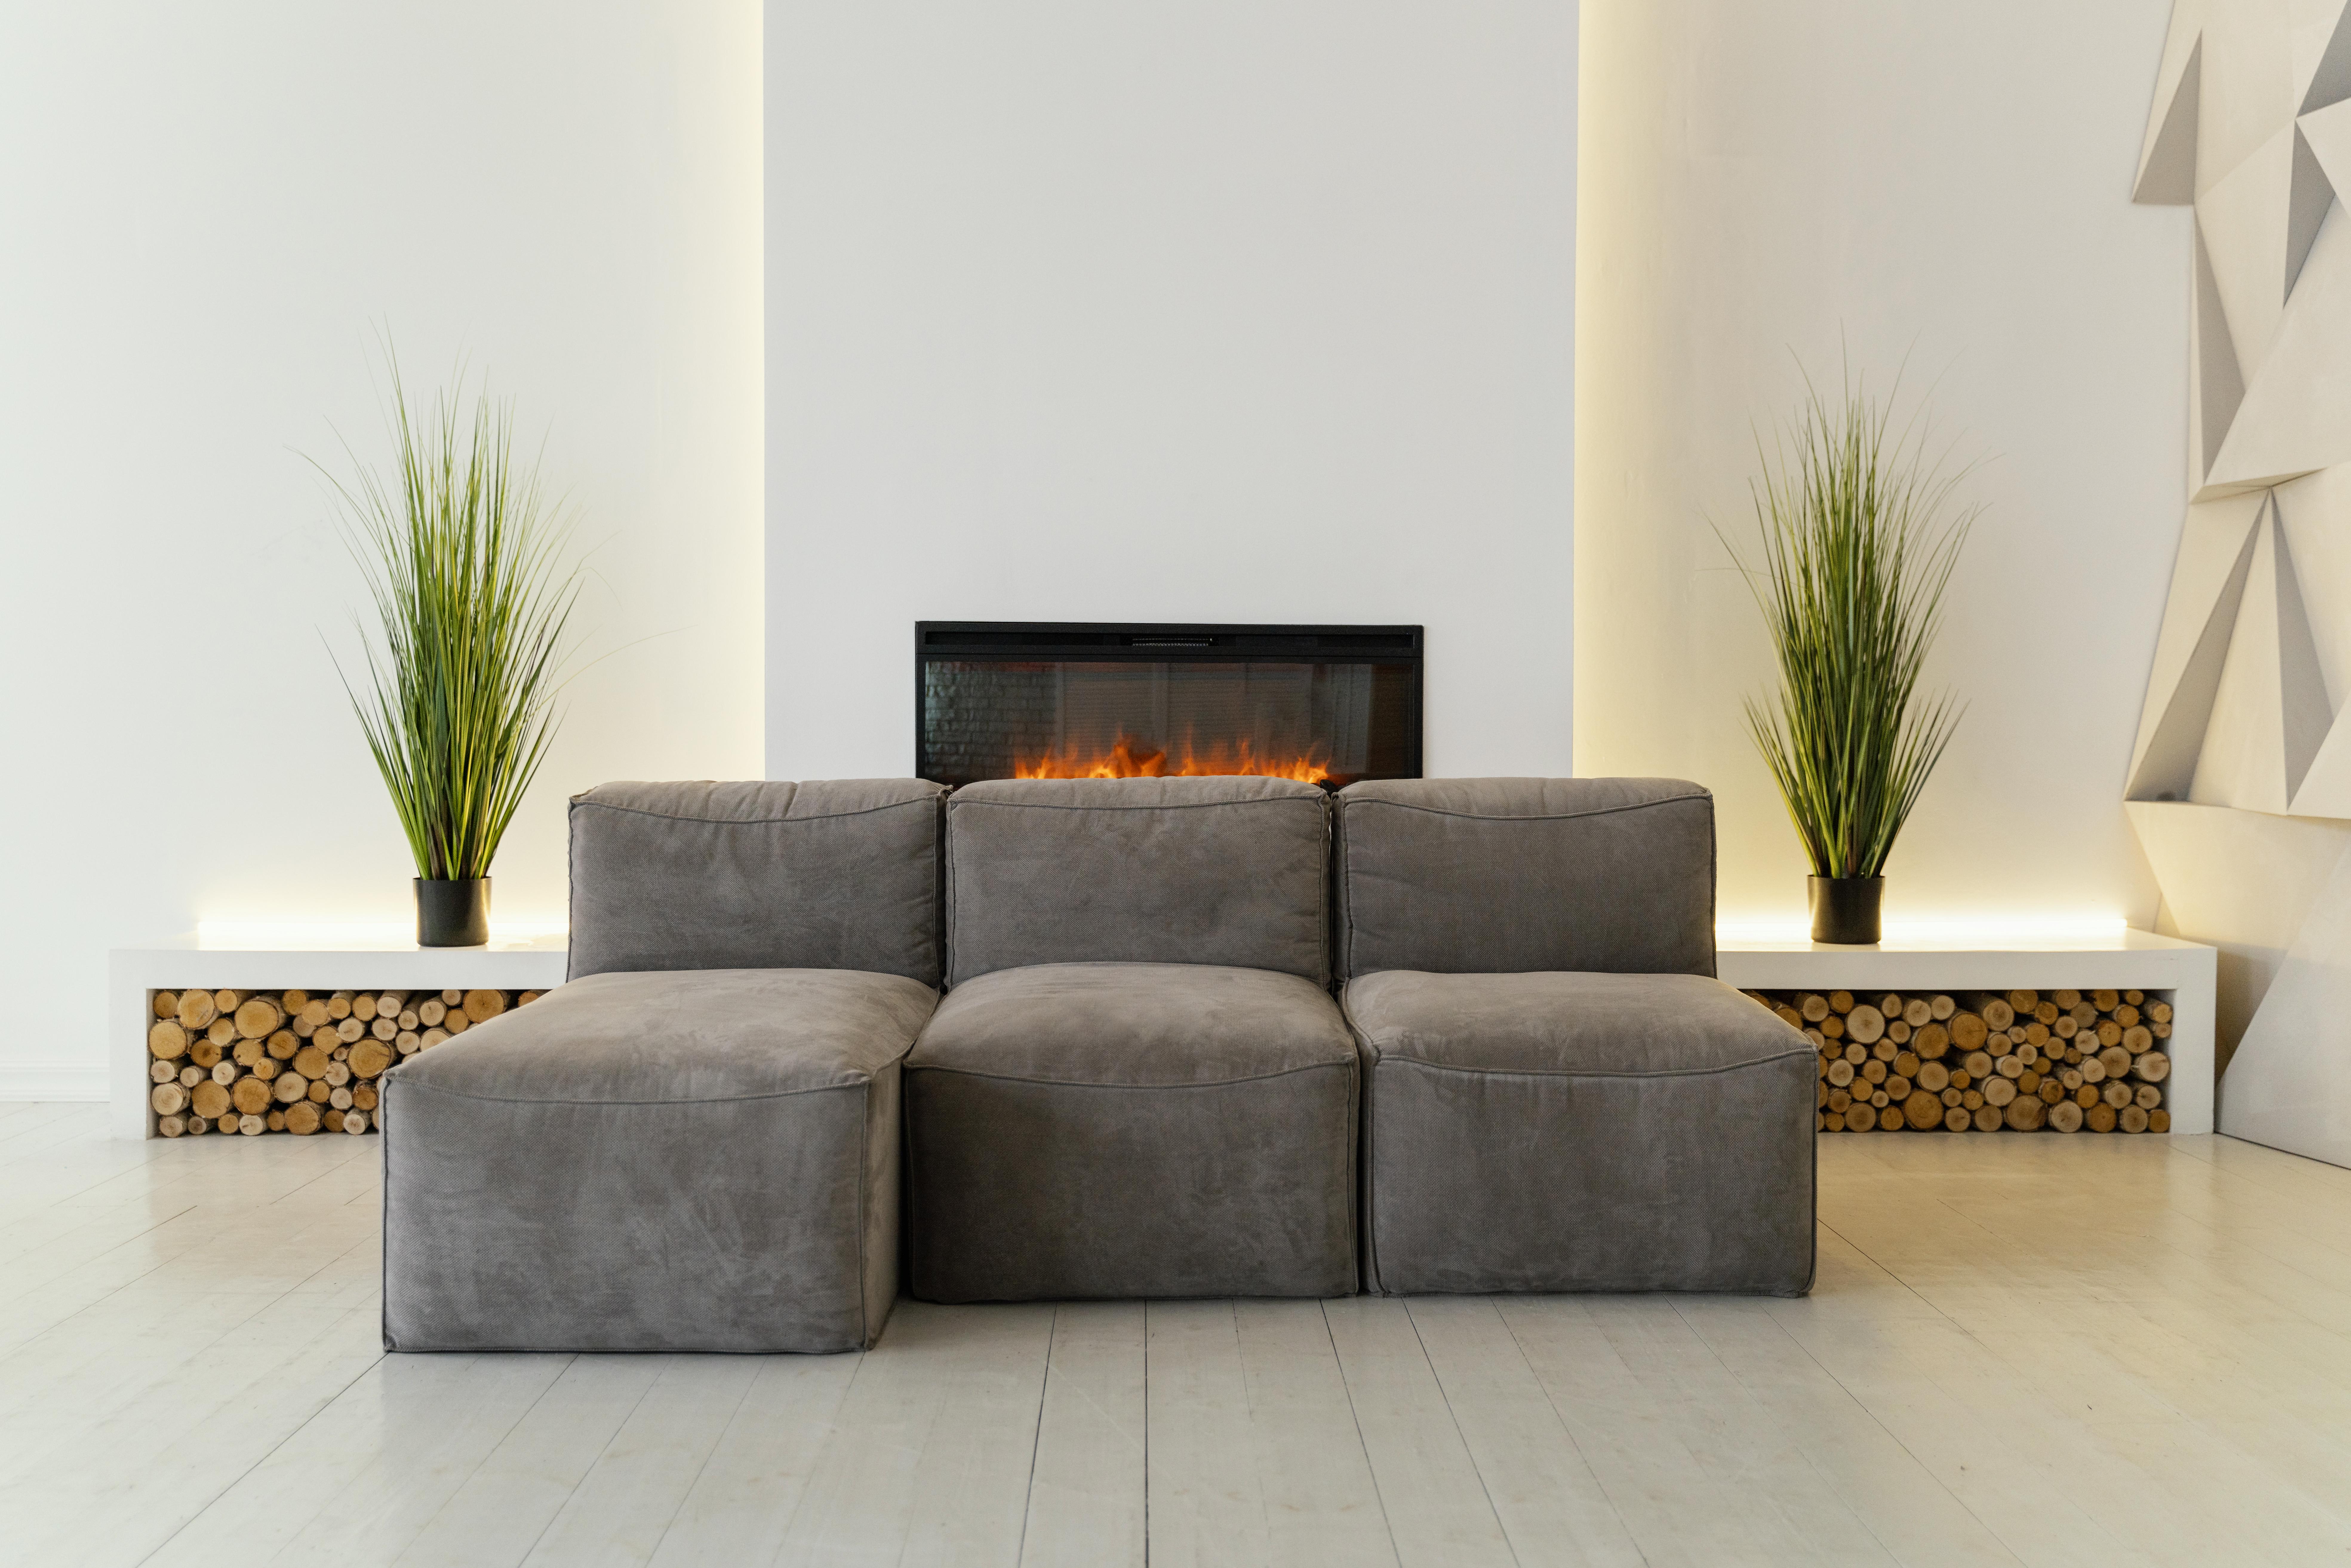 Where Should You Put a Fireplace in Your Home? - featured image